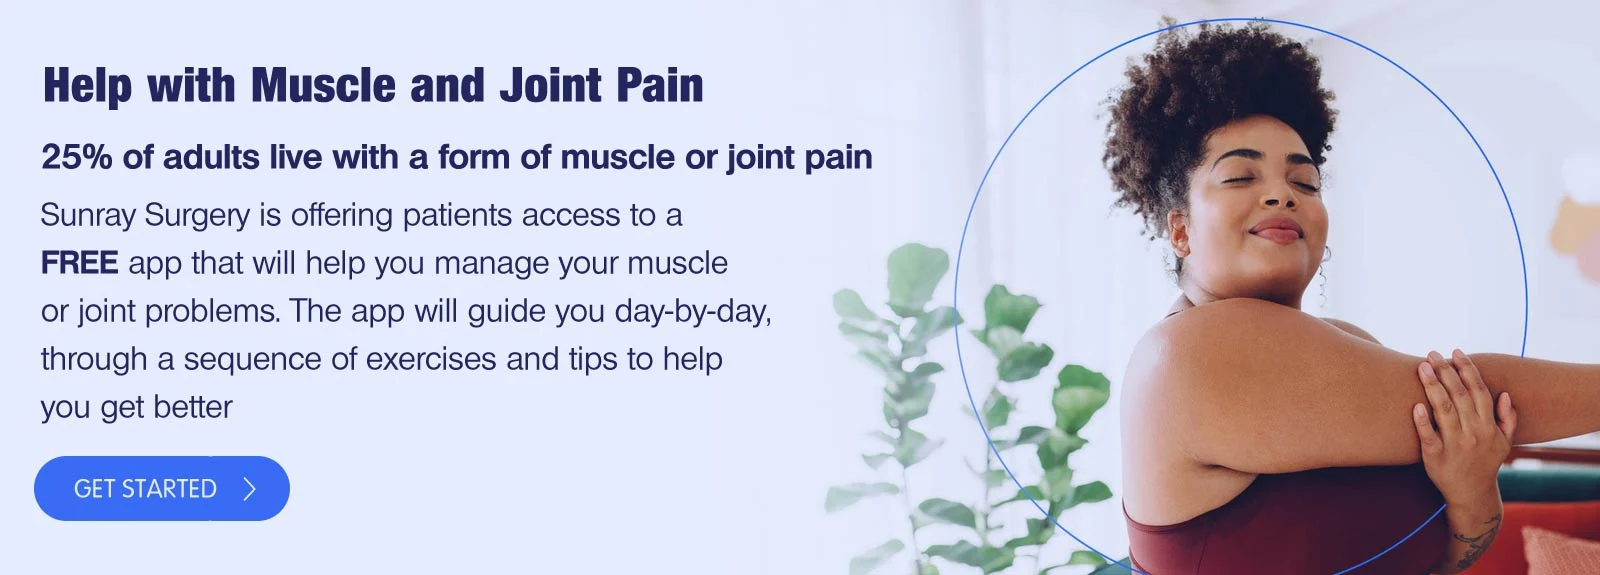 Use the get u better app to help with muscle and joint pain